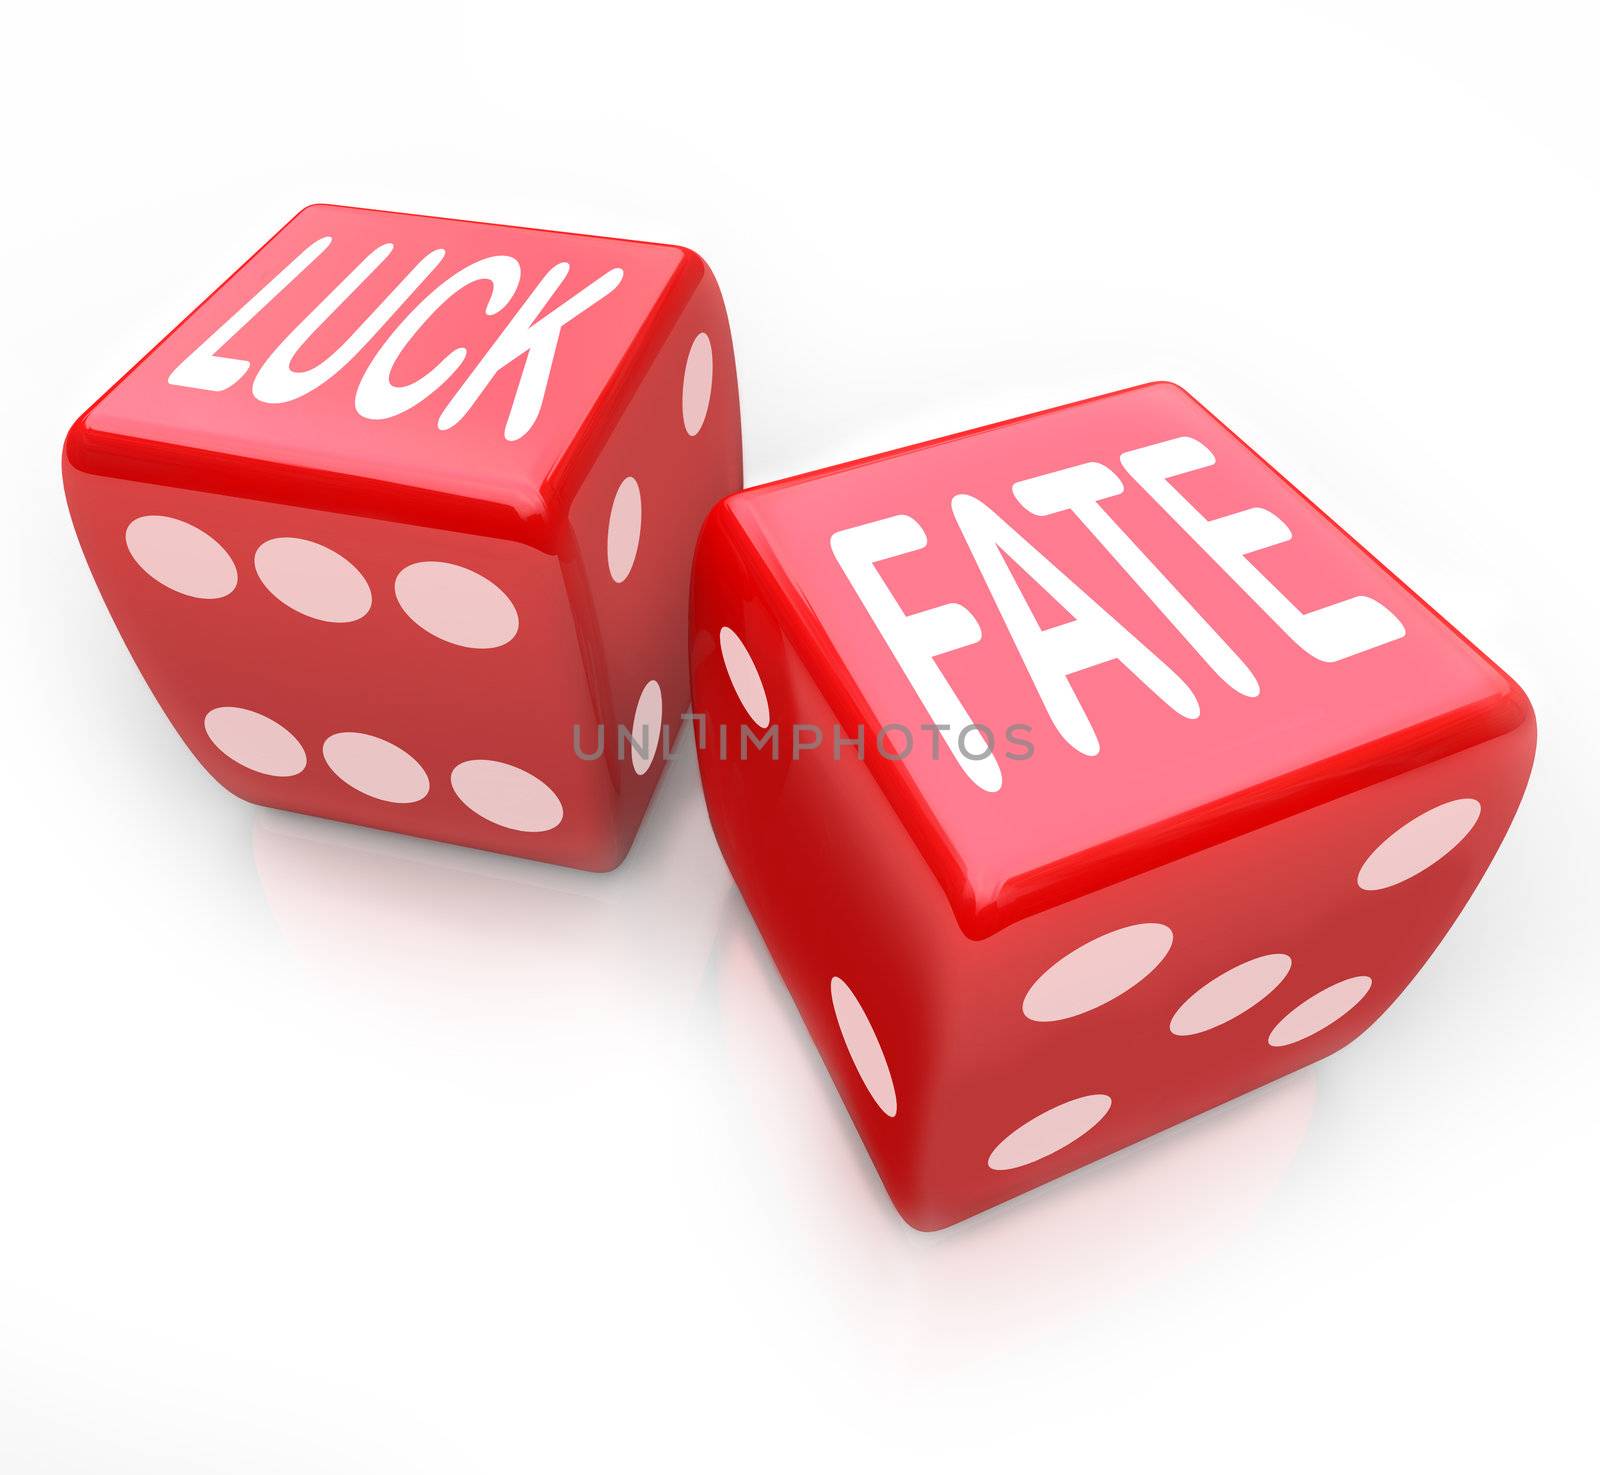 Two red dice featuring the words Luck and Fate representing putting your future at risk when you gamble for money in a game of chance and fortune